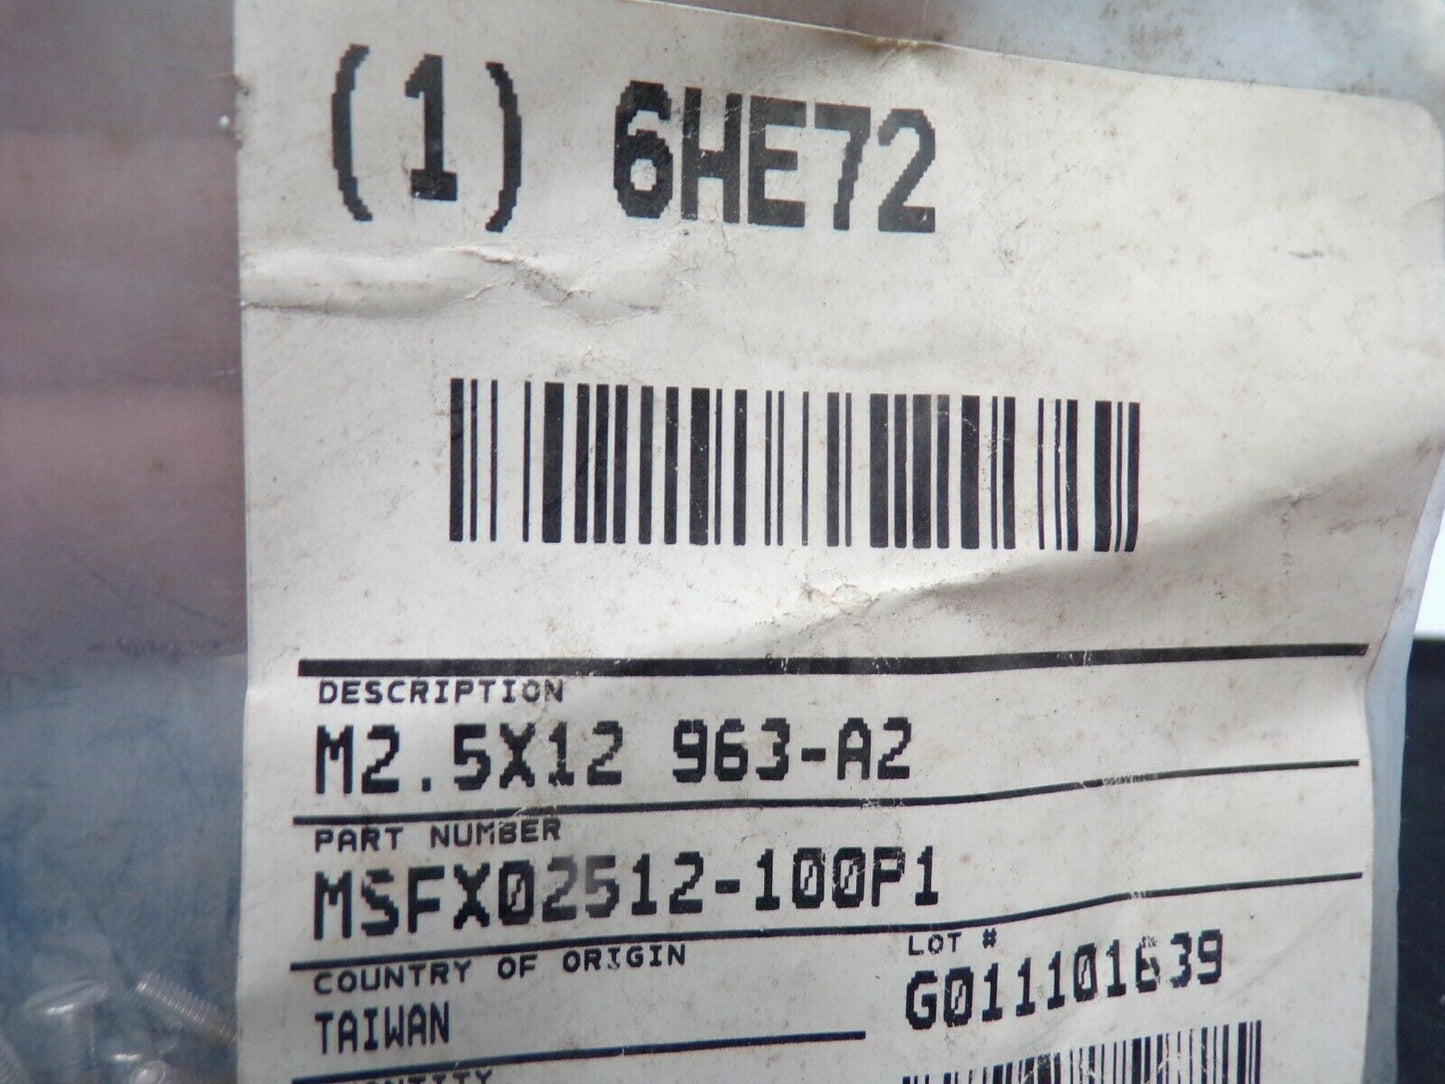 (100) FABORY M2.5-0.45mm Machine Screw Flat Slotted A2 SS Plain 12 mm L 6HE72 (184478874100-BT20(A))